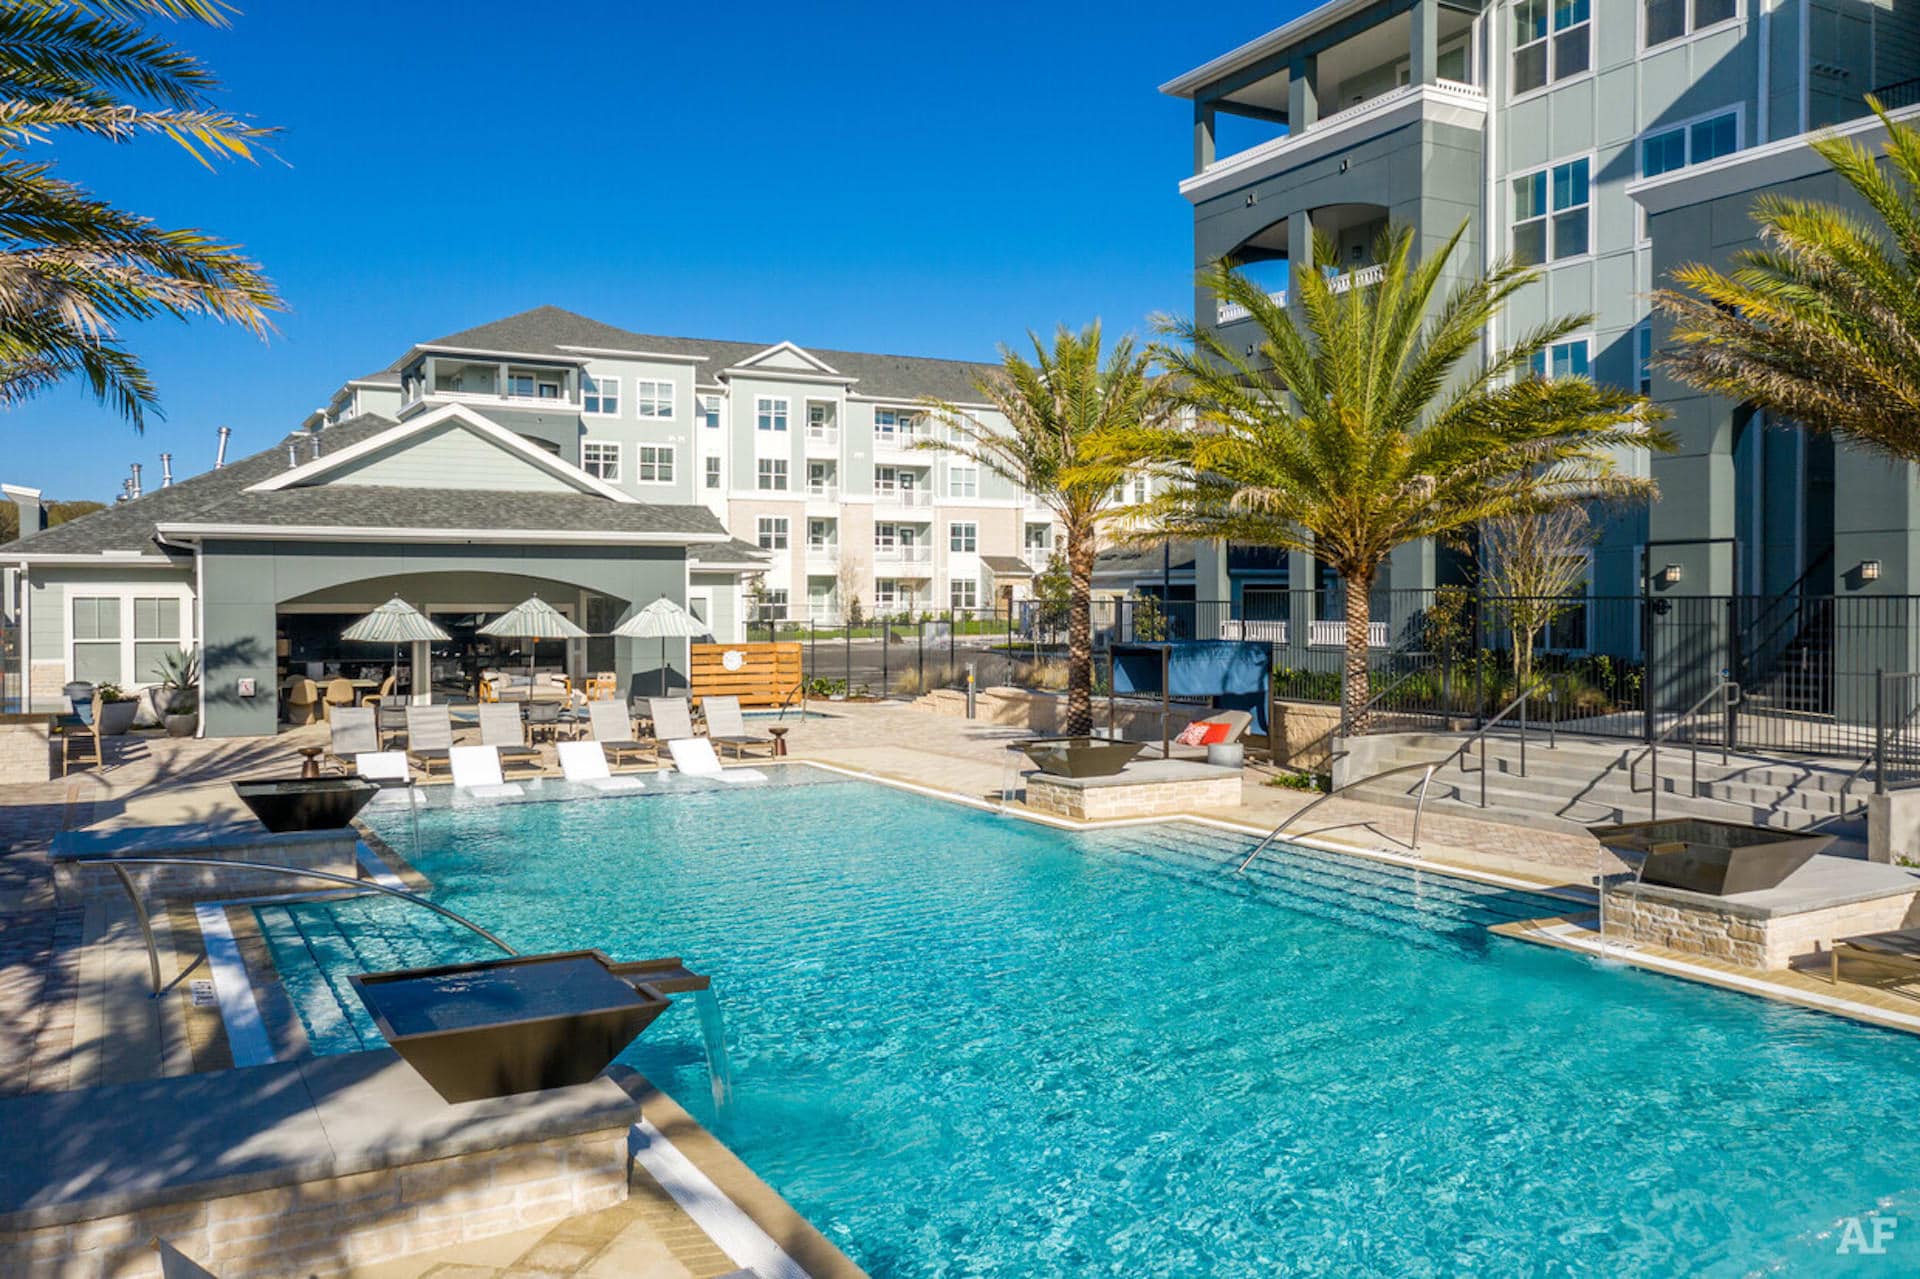 Property Image 2 - Family Friendly, Orlando Amenities Minutes Away | Champions Gate